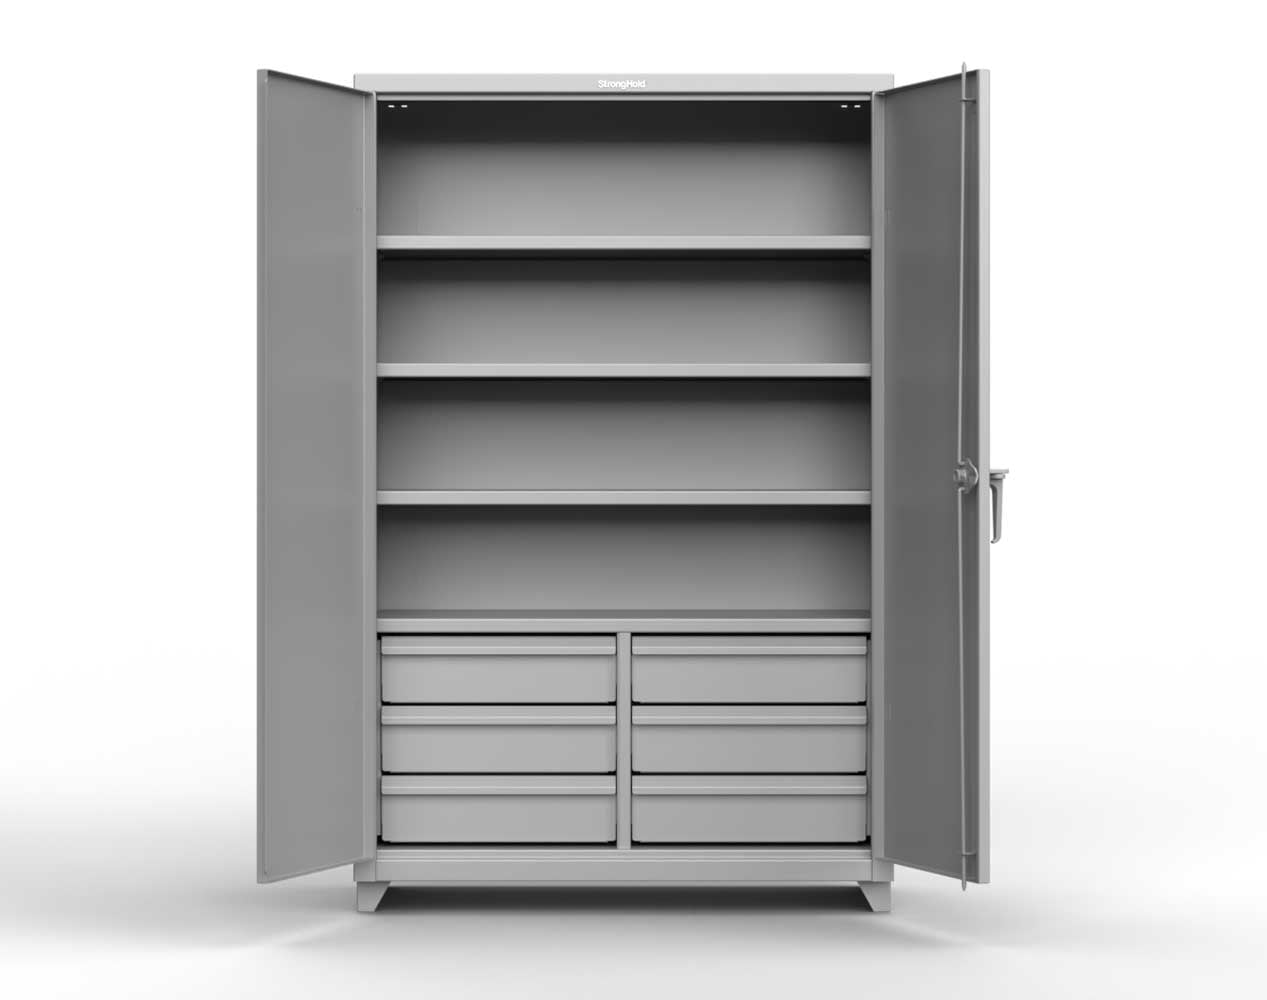 Extra Heavy Duty 14 GA Cabinet with 6 Half-Width Drawers, 3 Shelves - 60 In. W x 24 In. D x 75 In. H